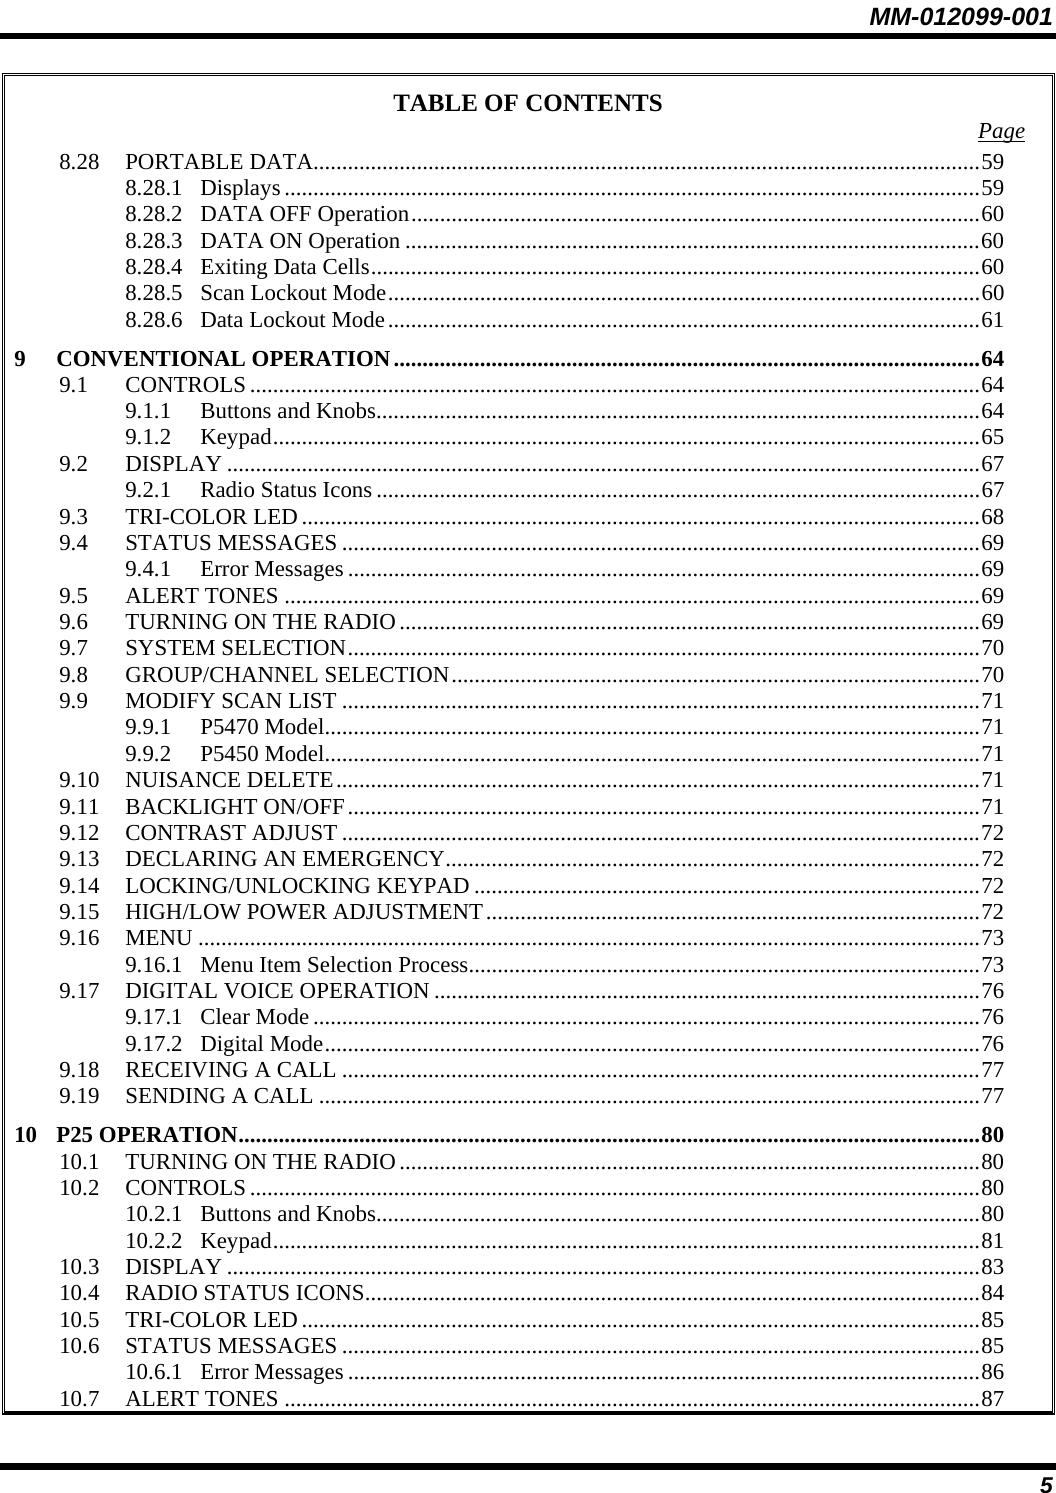 MM-012099-001 5 TABLE OF CONTENTS  Page 8.28 PORTABLE DATA....................................................................................................................59 8.28.1 Displays .........................................................................................................................59 8.28.2 DATA OFF Operation...................................................................................................60 8.28.3 DATA ON Operation ....................................................................................................60 8.28.4 Exiting Data Cells..........................................................................................................60 8.28.5 Scan Lockout Mode.......................................................................................................60 8.28.6 Data Lockout Mode.......................................................................................................61 9 CONVENTIONAL OPERATION......................................................................................................64 9.1 CONTROLS...............................................................................................................................64 9.1.1 Buttons and Knobs.........................................................................................................64 9.1.2 Keypad...........................................................................................................................65 9.2 DISPLAY ...................................................................................................................................67 9.2.1 Radio Status Icons .........................................................................................................67 9.3 TRI-COLOR LED......................................................................................................................68 9.4 STATUS MESSAGES ...............................................................................................................69 9.4.1 Error Messages ..............................................................................................................69 9.5 ALERT TONES .........................................................................................................................69 9.6 TURNING ON THE RADIO.....................................................................................................69 9.7 SYSTEM SELECTION..............................................................................................................70 9.8 GROUP/CHANNEL SELECTION............................................................................................70 9.9 MODIFY SCAN LIST ...............................................................................................................71 9.9.1 P5470 Model..................................................................................................................71 9.9.2 P5450 Model..................................................................................................................71 9.10 NUISANCE DELETE................................................................................................................71 9.11 BACKLIGHT ON/OFF..............................................................................................................71 9.12 CONTRAST ADJUST ...............................................................................................................72 9.13 DECLARING AN EMERGENCY.............................................................................................72 9.14 LOCKING/UNLOCKING KEYPAD ........................................................................................72 9.15 HIGH/LOW POWER ADJUSTMENT......................................................................................72 9.16 MENU ........................................................................................................................................73 9.16.1 Menu Item Selection Process.........................................................................................73 9.17 DIGITAL VOICE OPERATION ...............................................................................................76 9.17.1 Clear Mode....................................................................................................................76 9.17.2 Digital Mode..................................................................................................................76 9.18 RECEIVING A CALL ...............................................................................................................77 9.19 SENDING A CALL ...................................................................................................................77 10 P25 OPERATION.................................................................................................................................80 10.1 TURNING ON THE RADIO.....................................................................................................80 10.2 CONTROLS...............................................................................................................................80 10.2.1 Buttons and Knobs.........................................................................................................80 10.2.2 Keypad...........................................................................................................................81 10.3 DISPLAY ...................................................................................................................................83 10.4 RADIO STATUS ICONS...........................................................................................................84 10.5 TRI-COLOR LED......................................................................................................................85 10.6 STATUS MESSAGES ...............................................................................................................85 10.6.1 Error Messages ..............................................................................................................86 10.7 ALERT TONES .........................................................................................................................87 